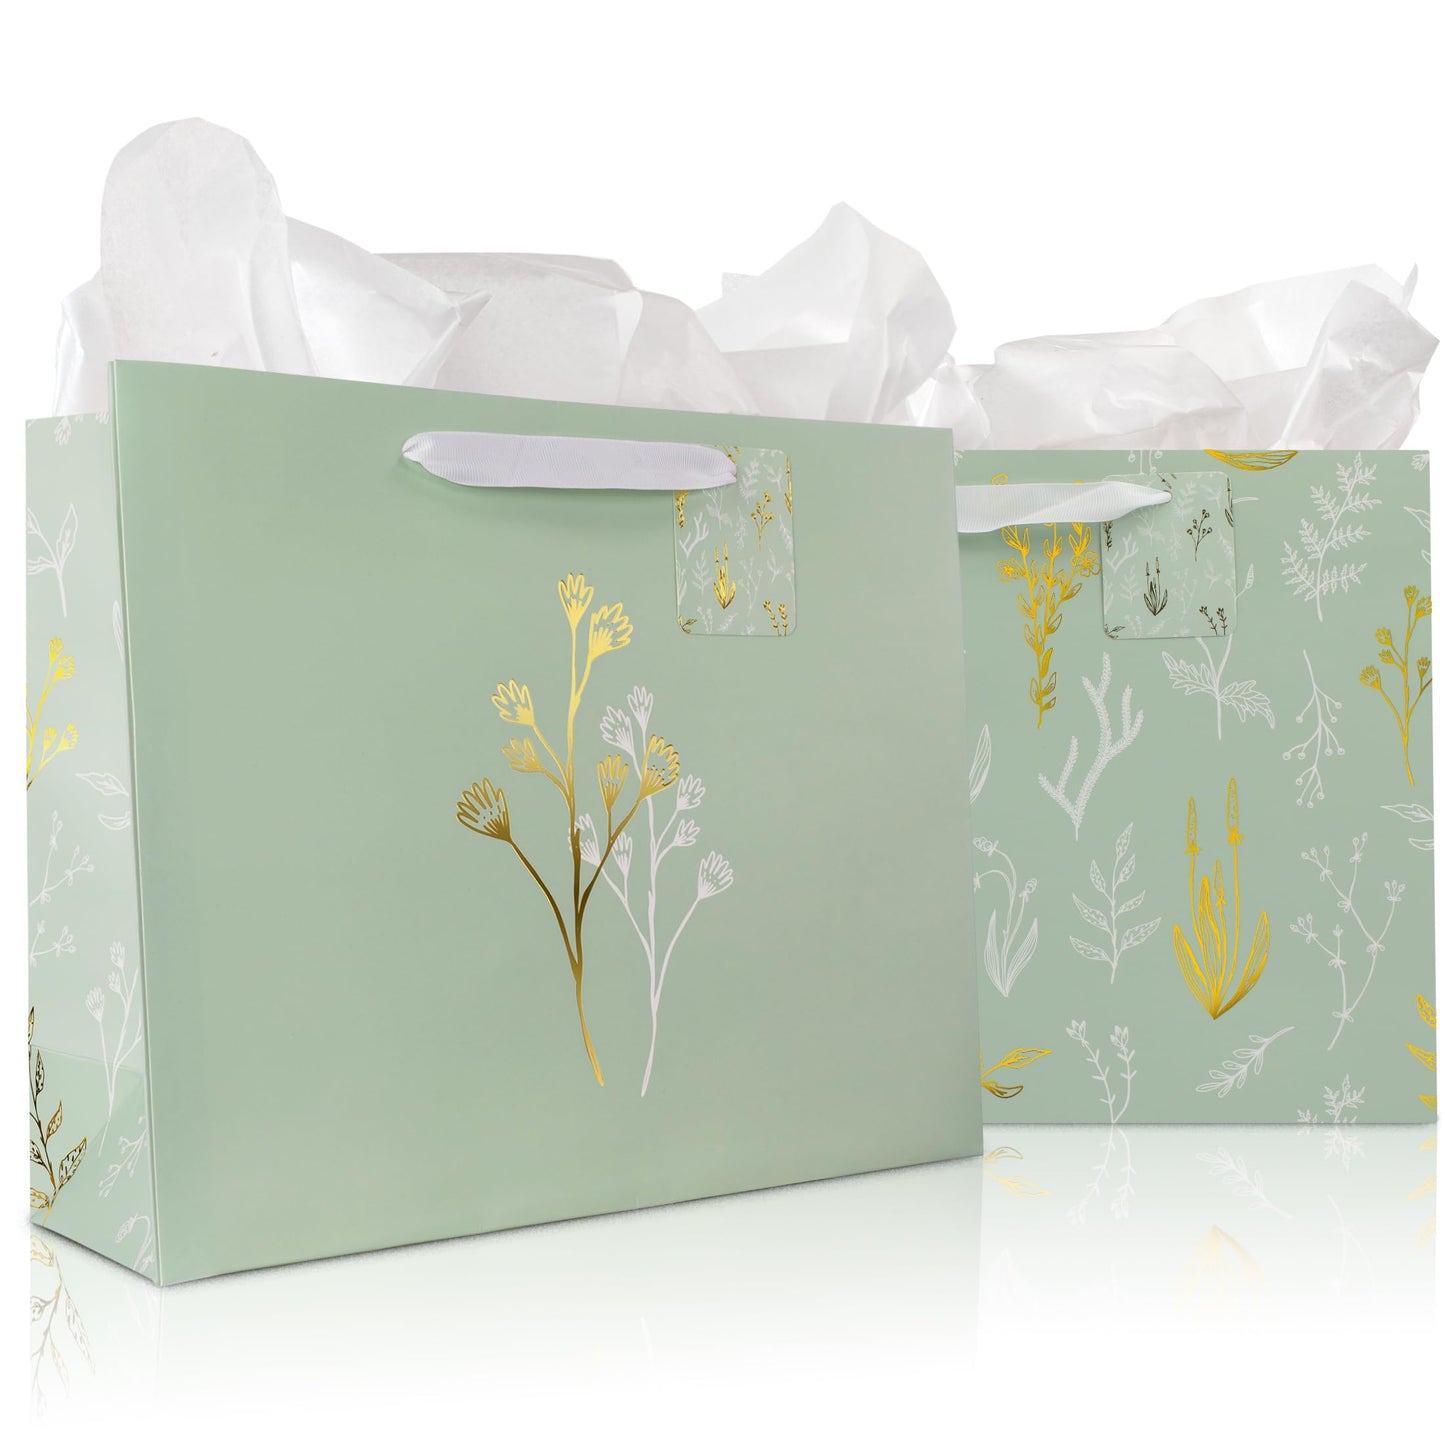 Beautiful Gift Bags Set of 2 - Large 13" Bags with Handles incl. Matching Tissue Paper, Cards & Stickers - Reusable and Perfect For Presents of Any Birthday, Weddings, Mothers Day & Special Occasion